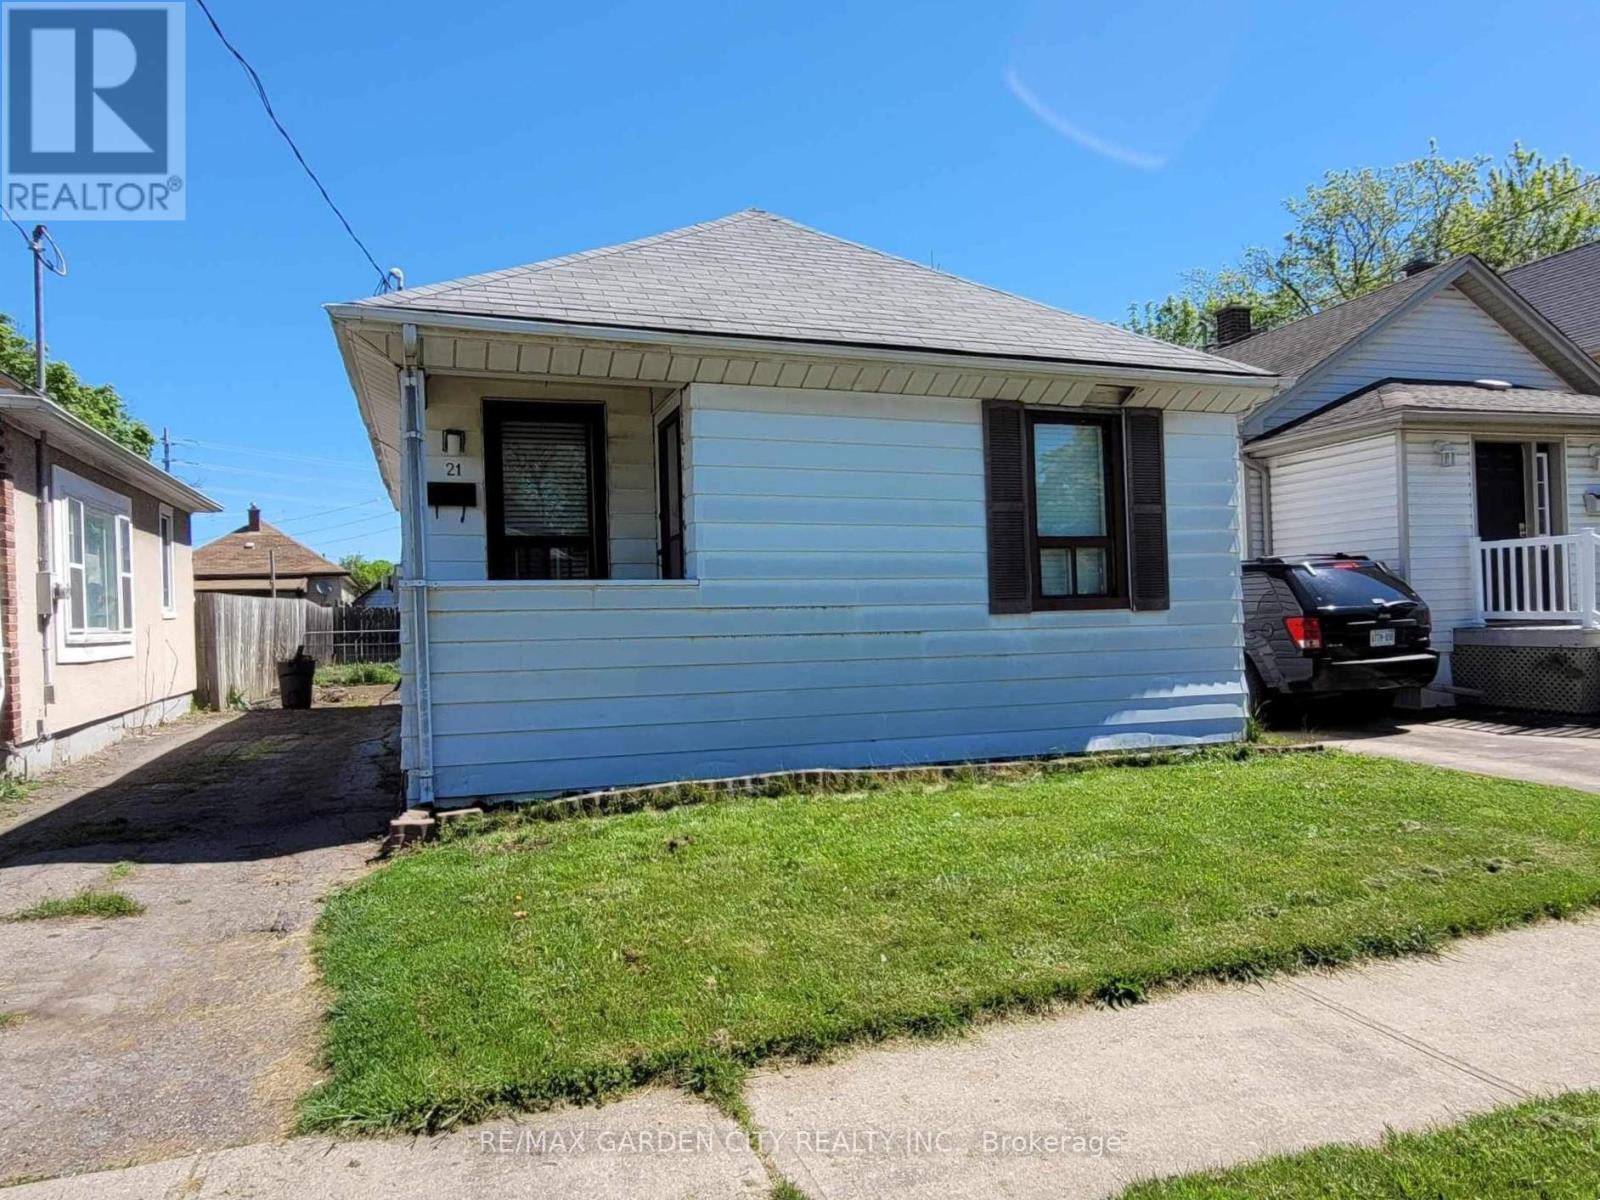 21 TRAPNELL ST, st. catharines, Ontario